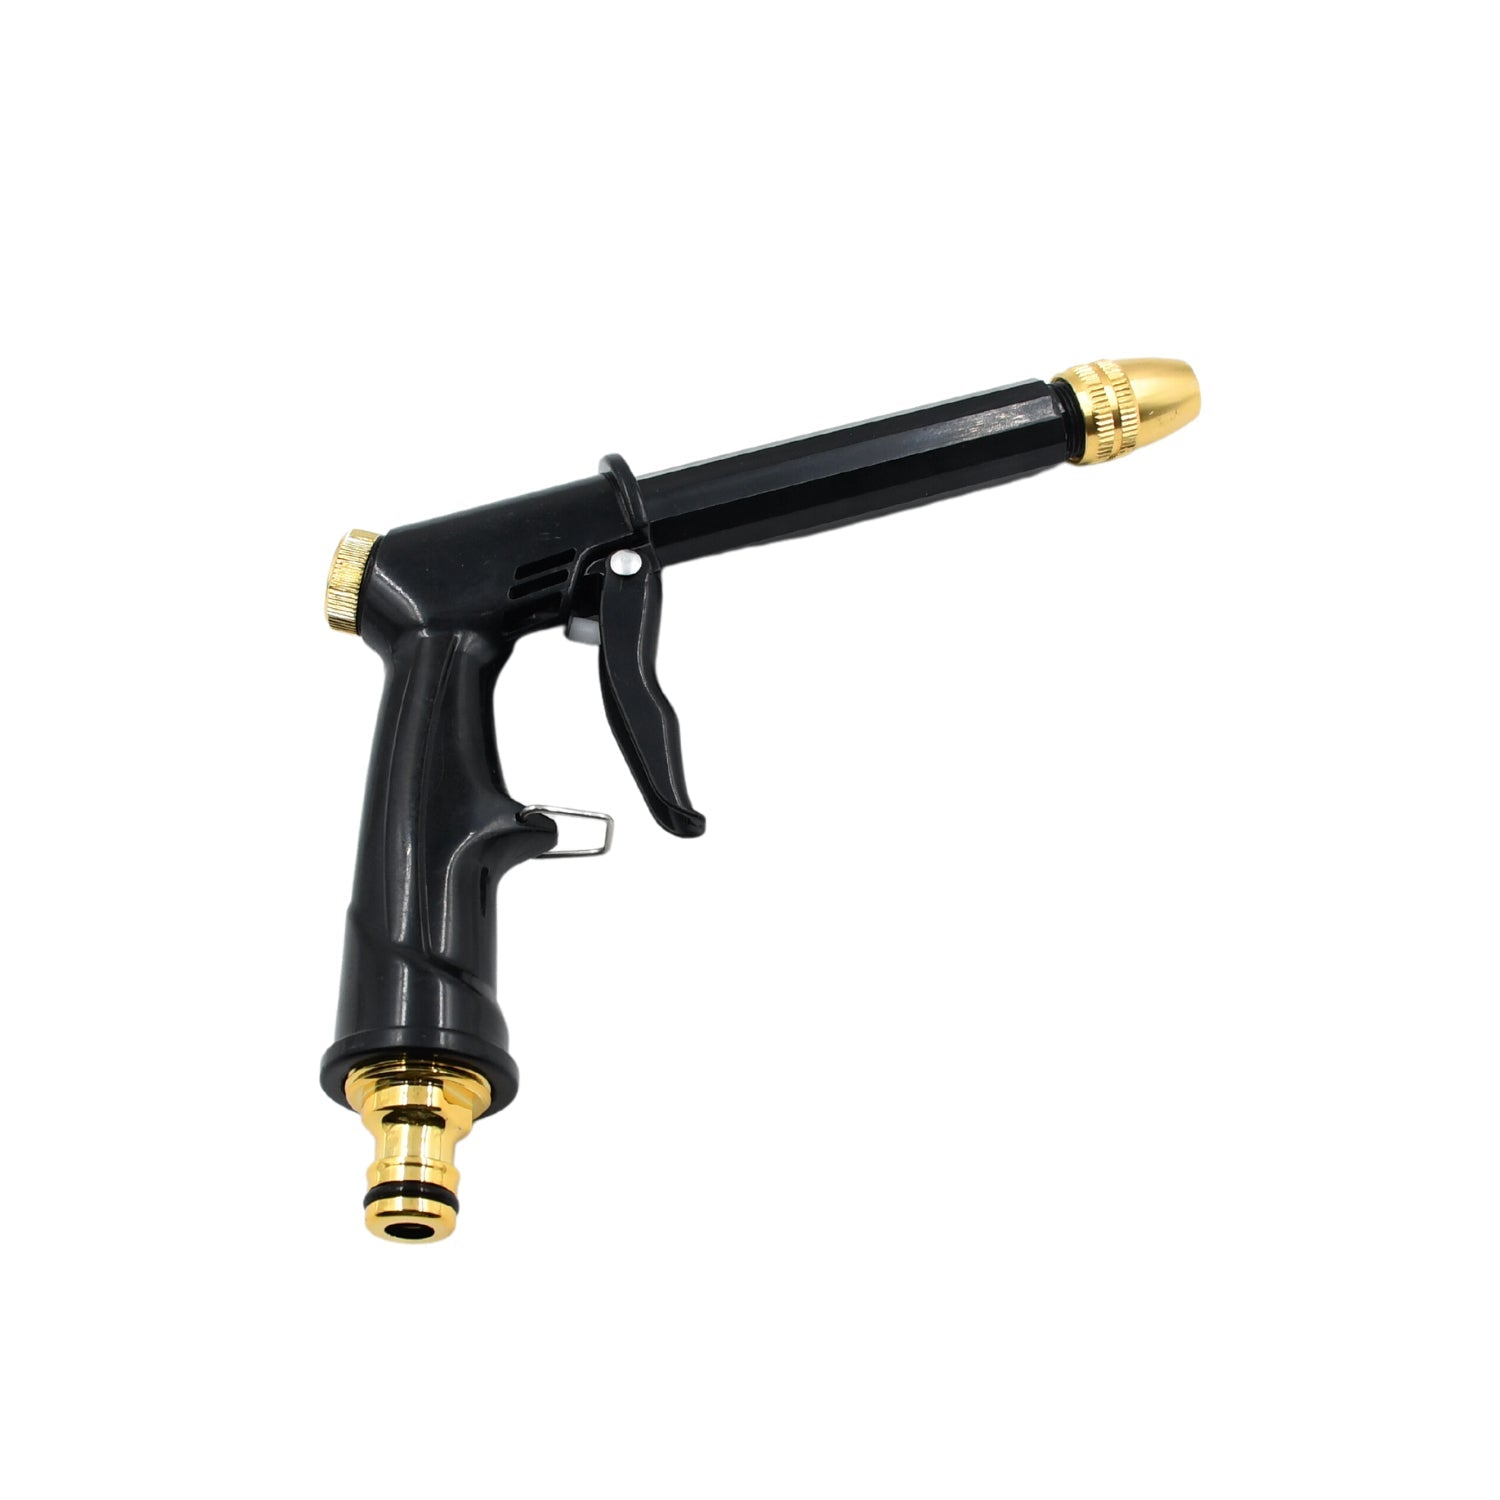 Plastic Body, Metal Trigger & Brass Nozzle Water Spray Gun For Water Pipe | Non-Slip | Comfortable Grip | Multiple Spray Modes | Ideal Pipe Nozzle For Car Wash, Gardening,& Other Uses